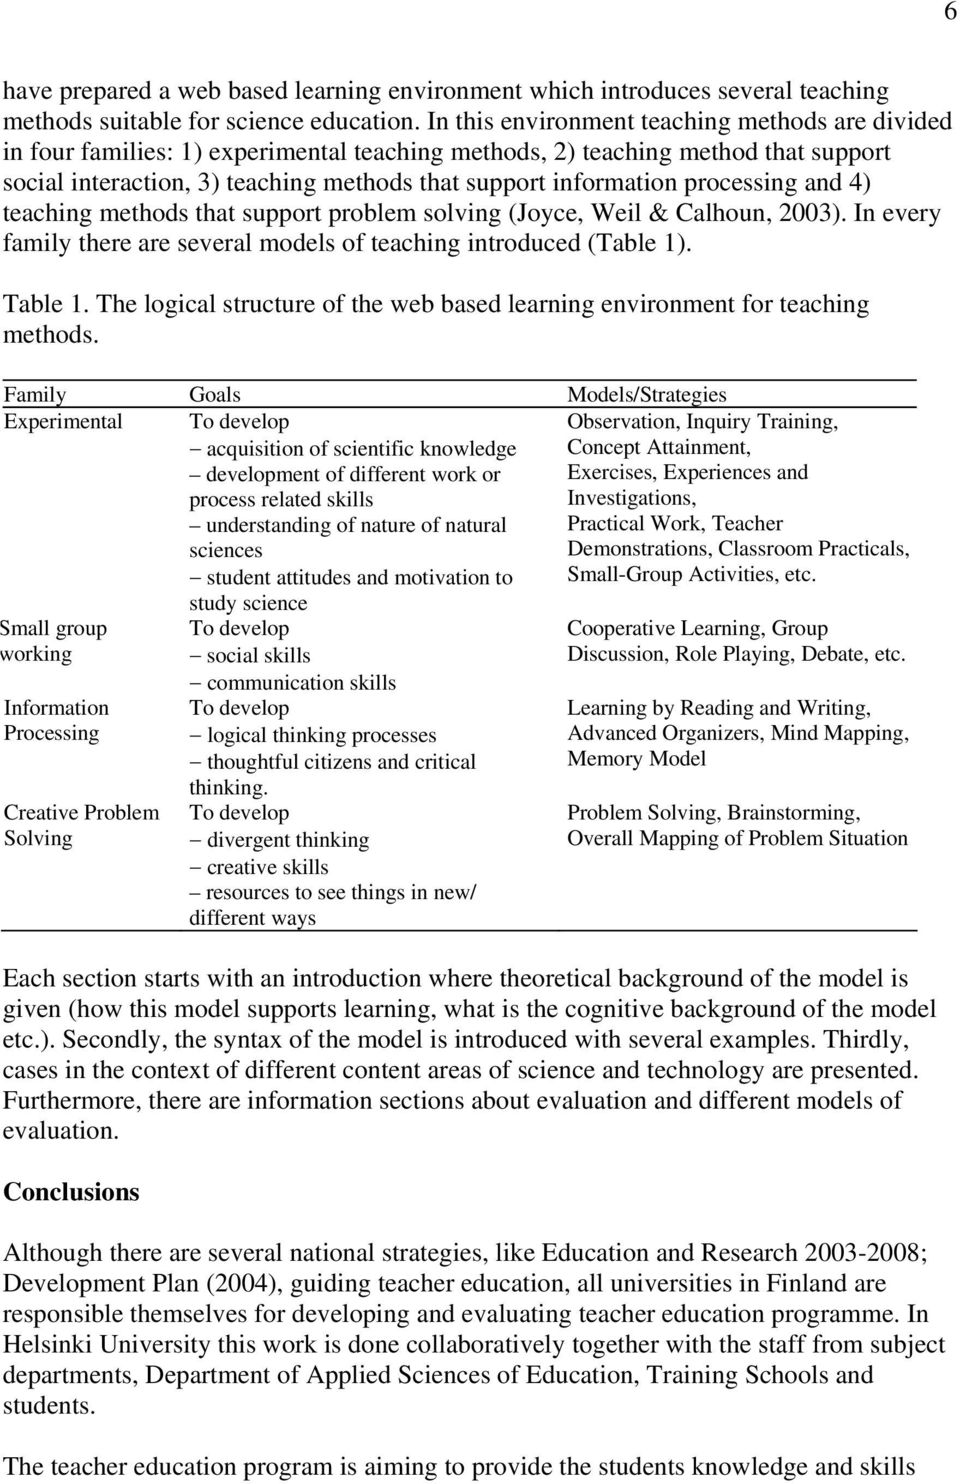 processing and 4) teaching methods that support problem solving (Joyce, Weil & Calhoun, 2003). In every family there are several models of teaching introduced (Table 1). Table 1.